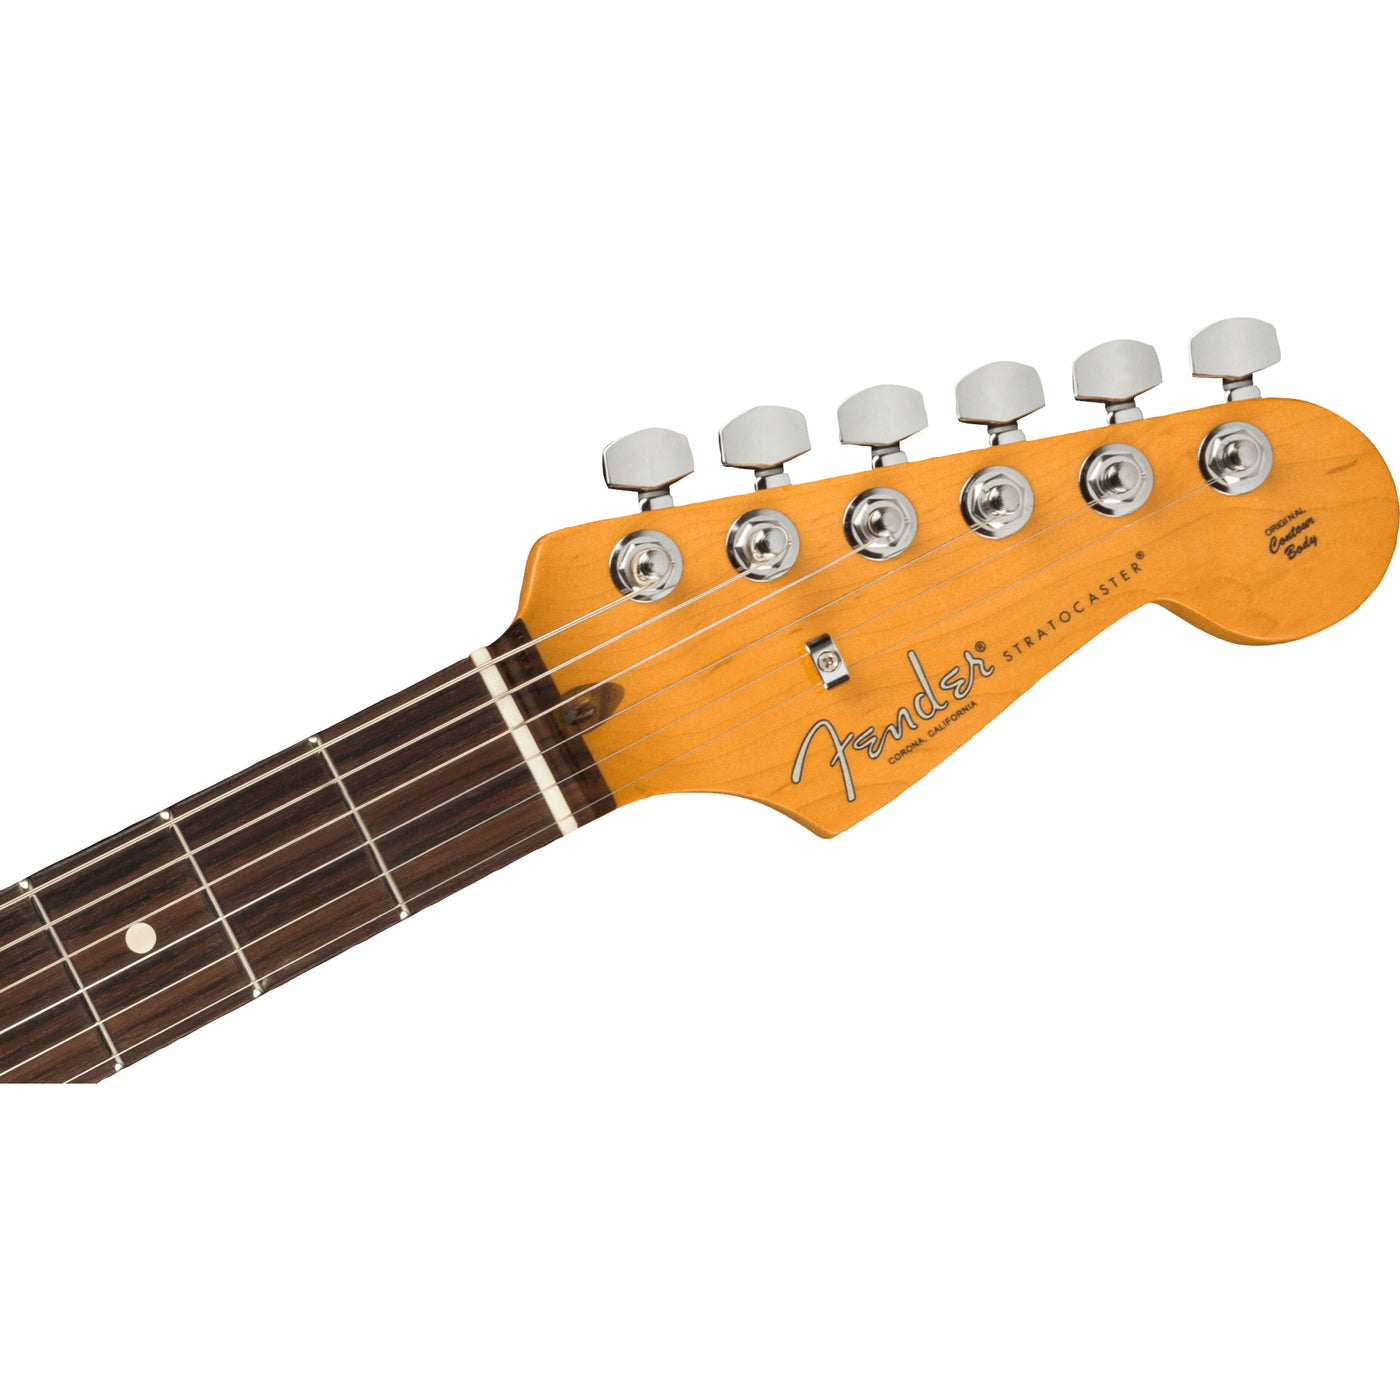 Fender American Professional ll Stratocaster Electric Guitar, Roasted Pine (0113900763)